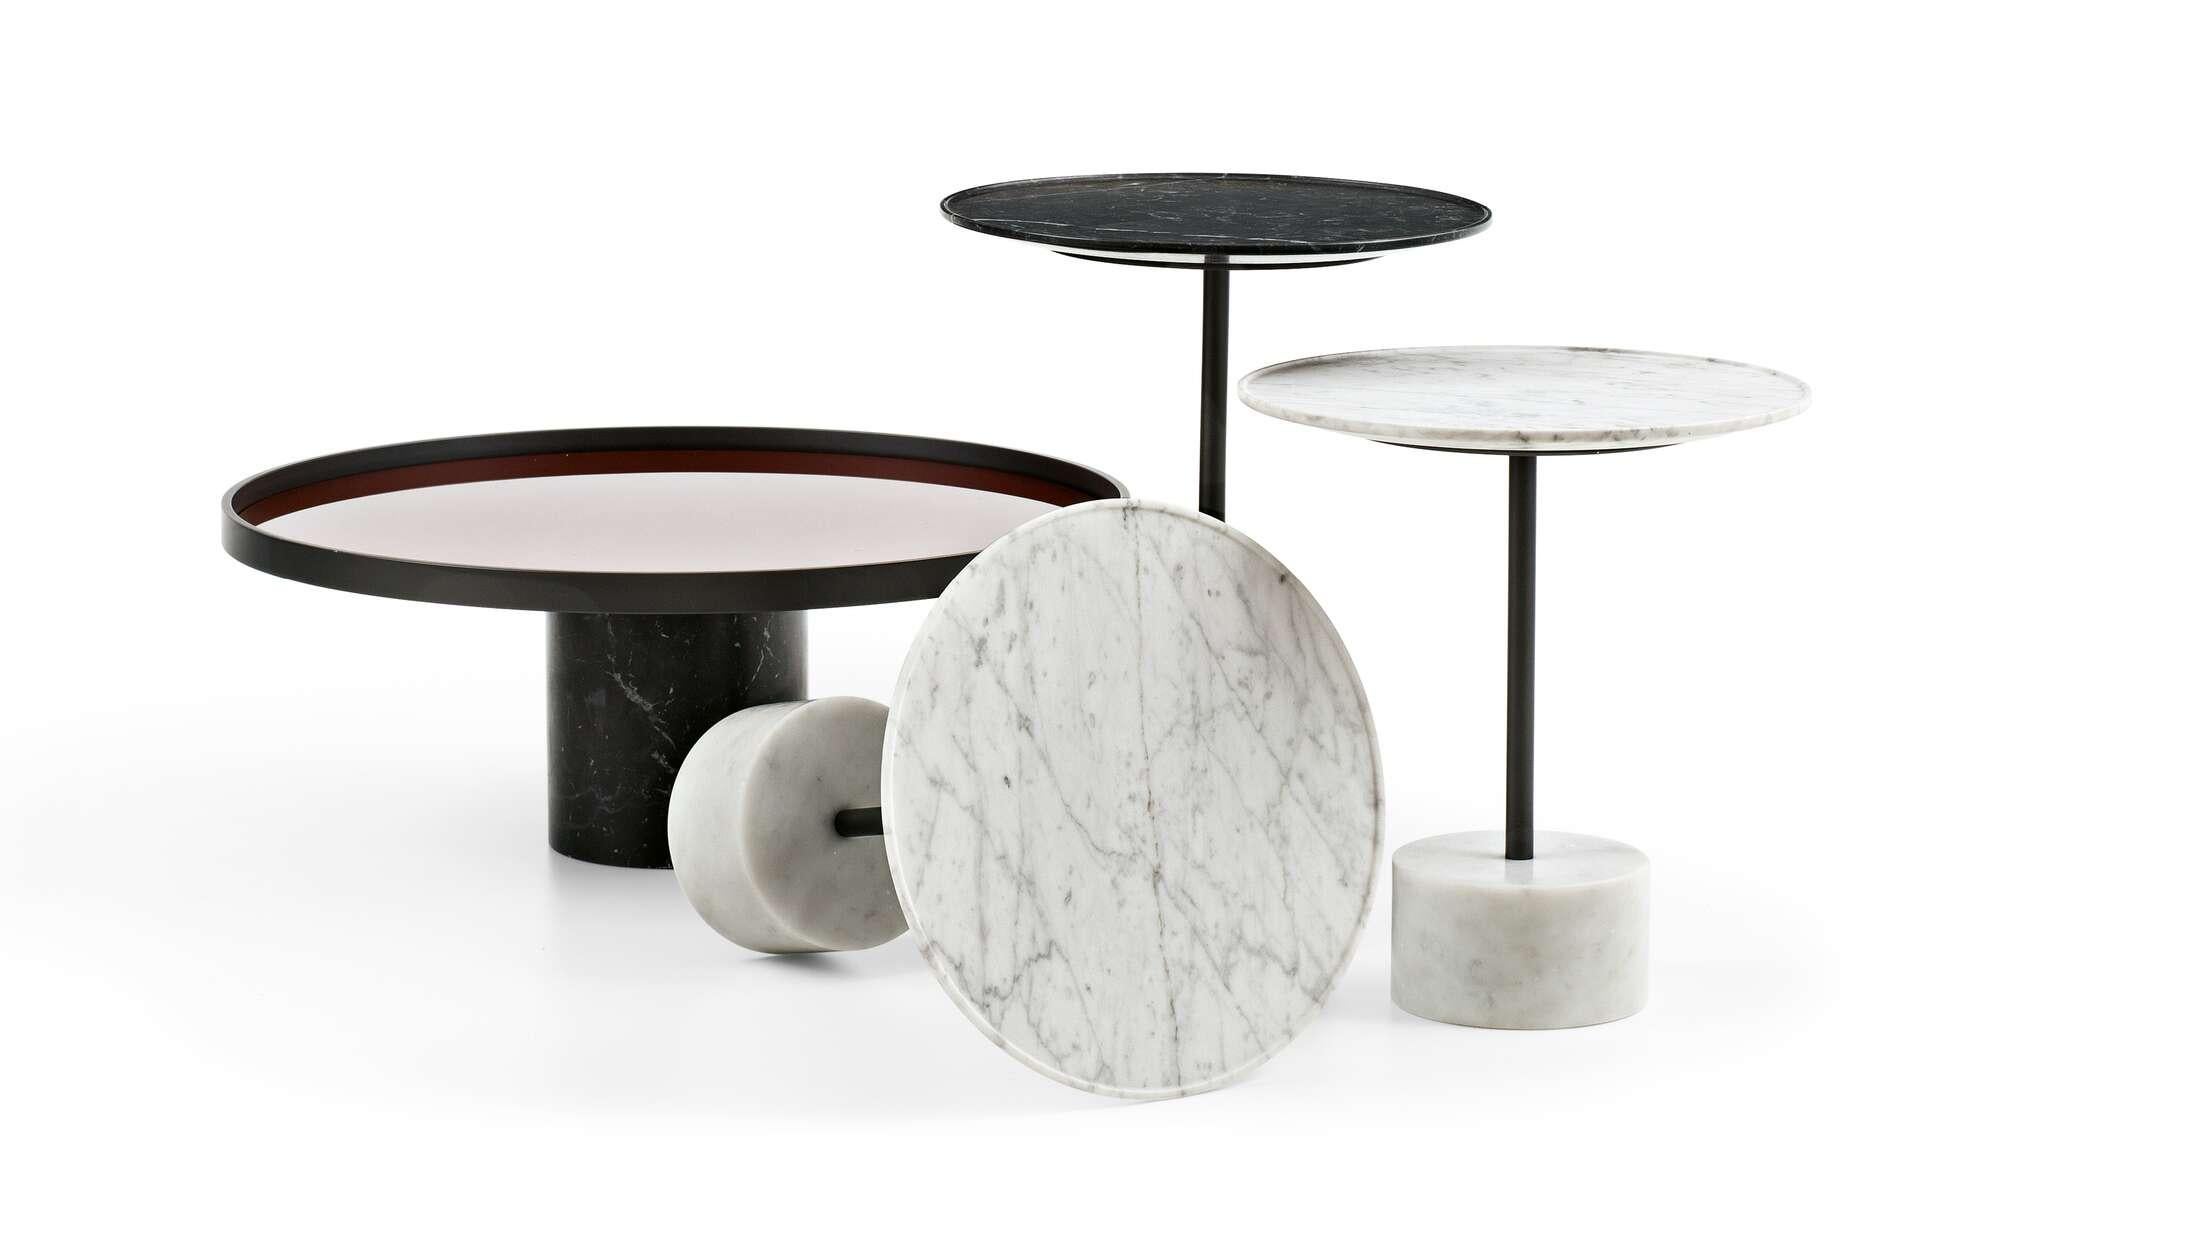 Piero Lissoni produces a series of design tables and low tables that feature modular, cylindrical shapes designed for both home furnishings and for use in contract settings and restaurants. Available In both high and low versions, they also come